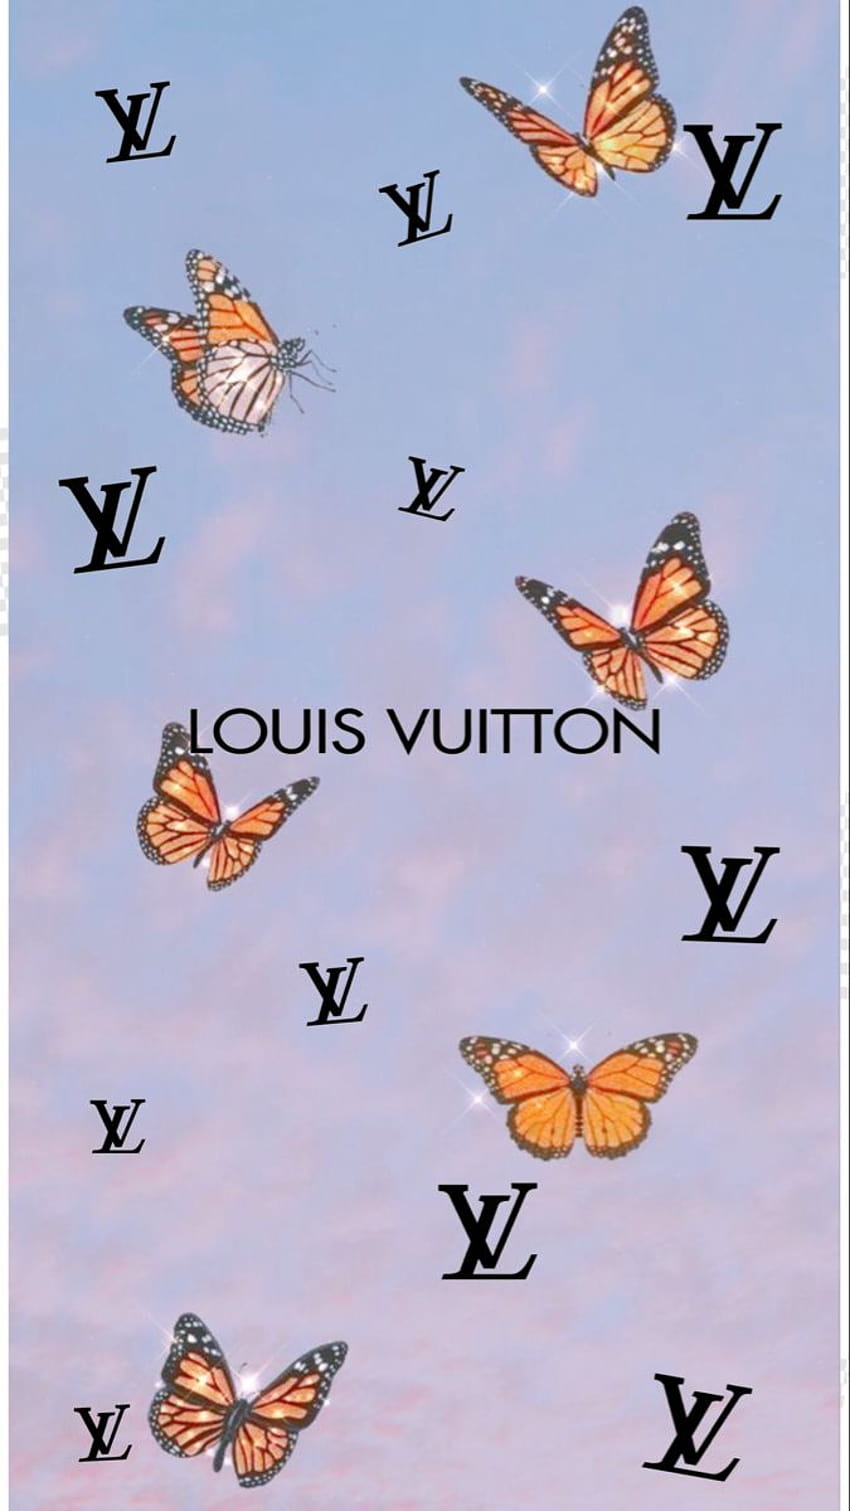 Download wallpapers Louis Vuitton turquoise logo, 4k, turquoise neon  lights, creative, turquoise abstract background, Louis Vuitton logo,  fashion brands, Louis Vuitton for desktop free. Pictures for desktop free